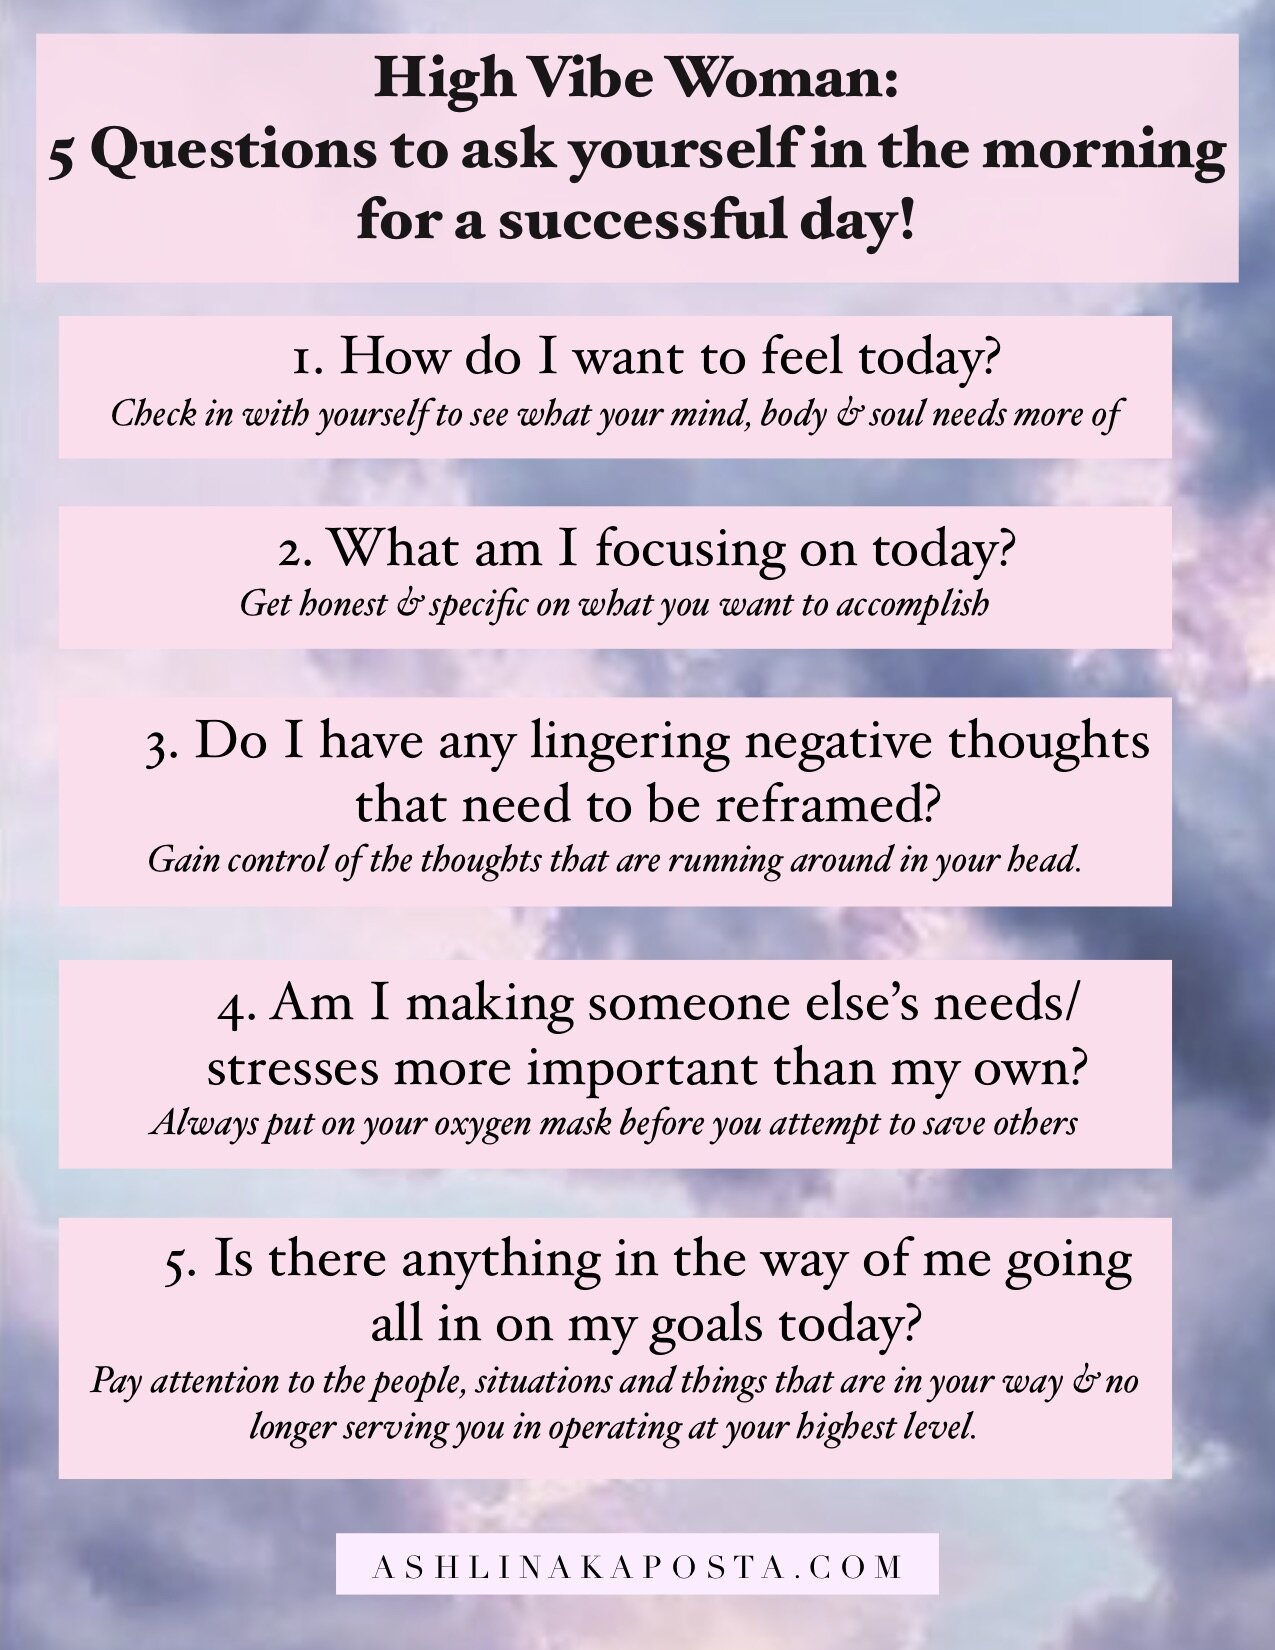 5 questions to ask yourself for a powerful morning and successful day ...